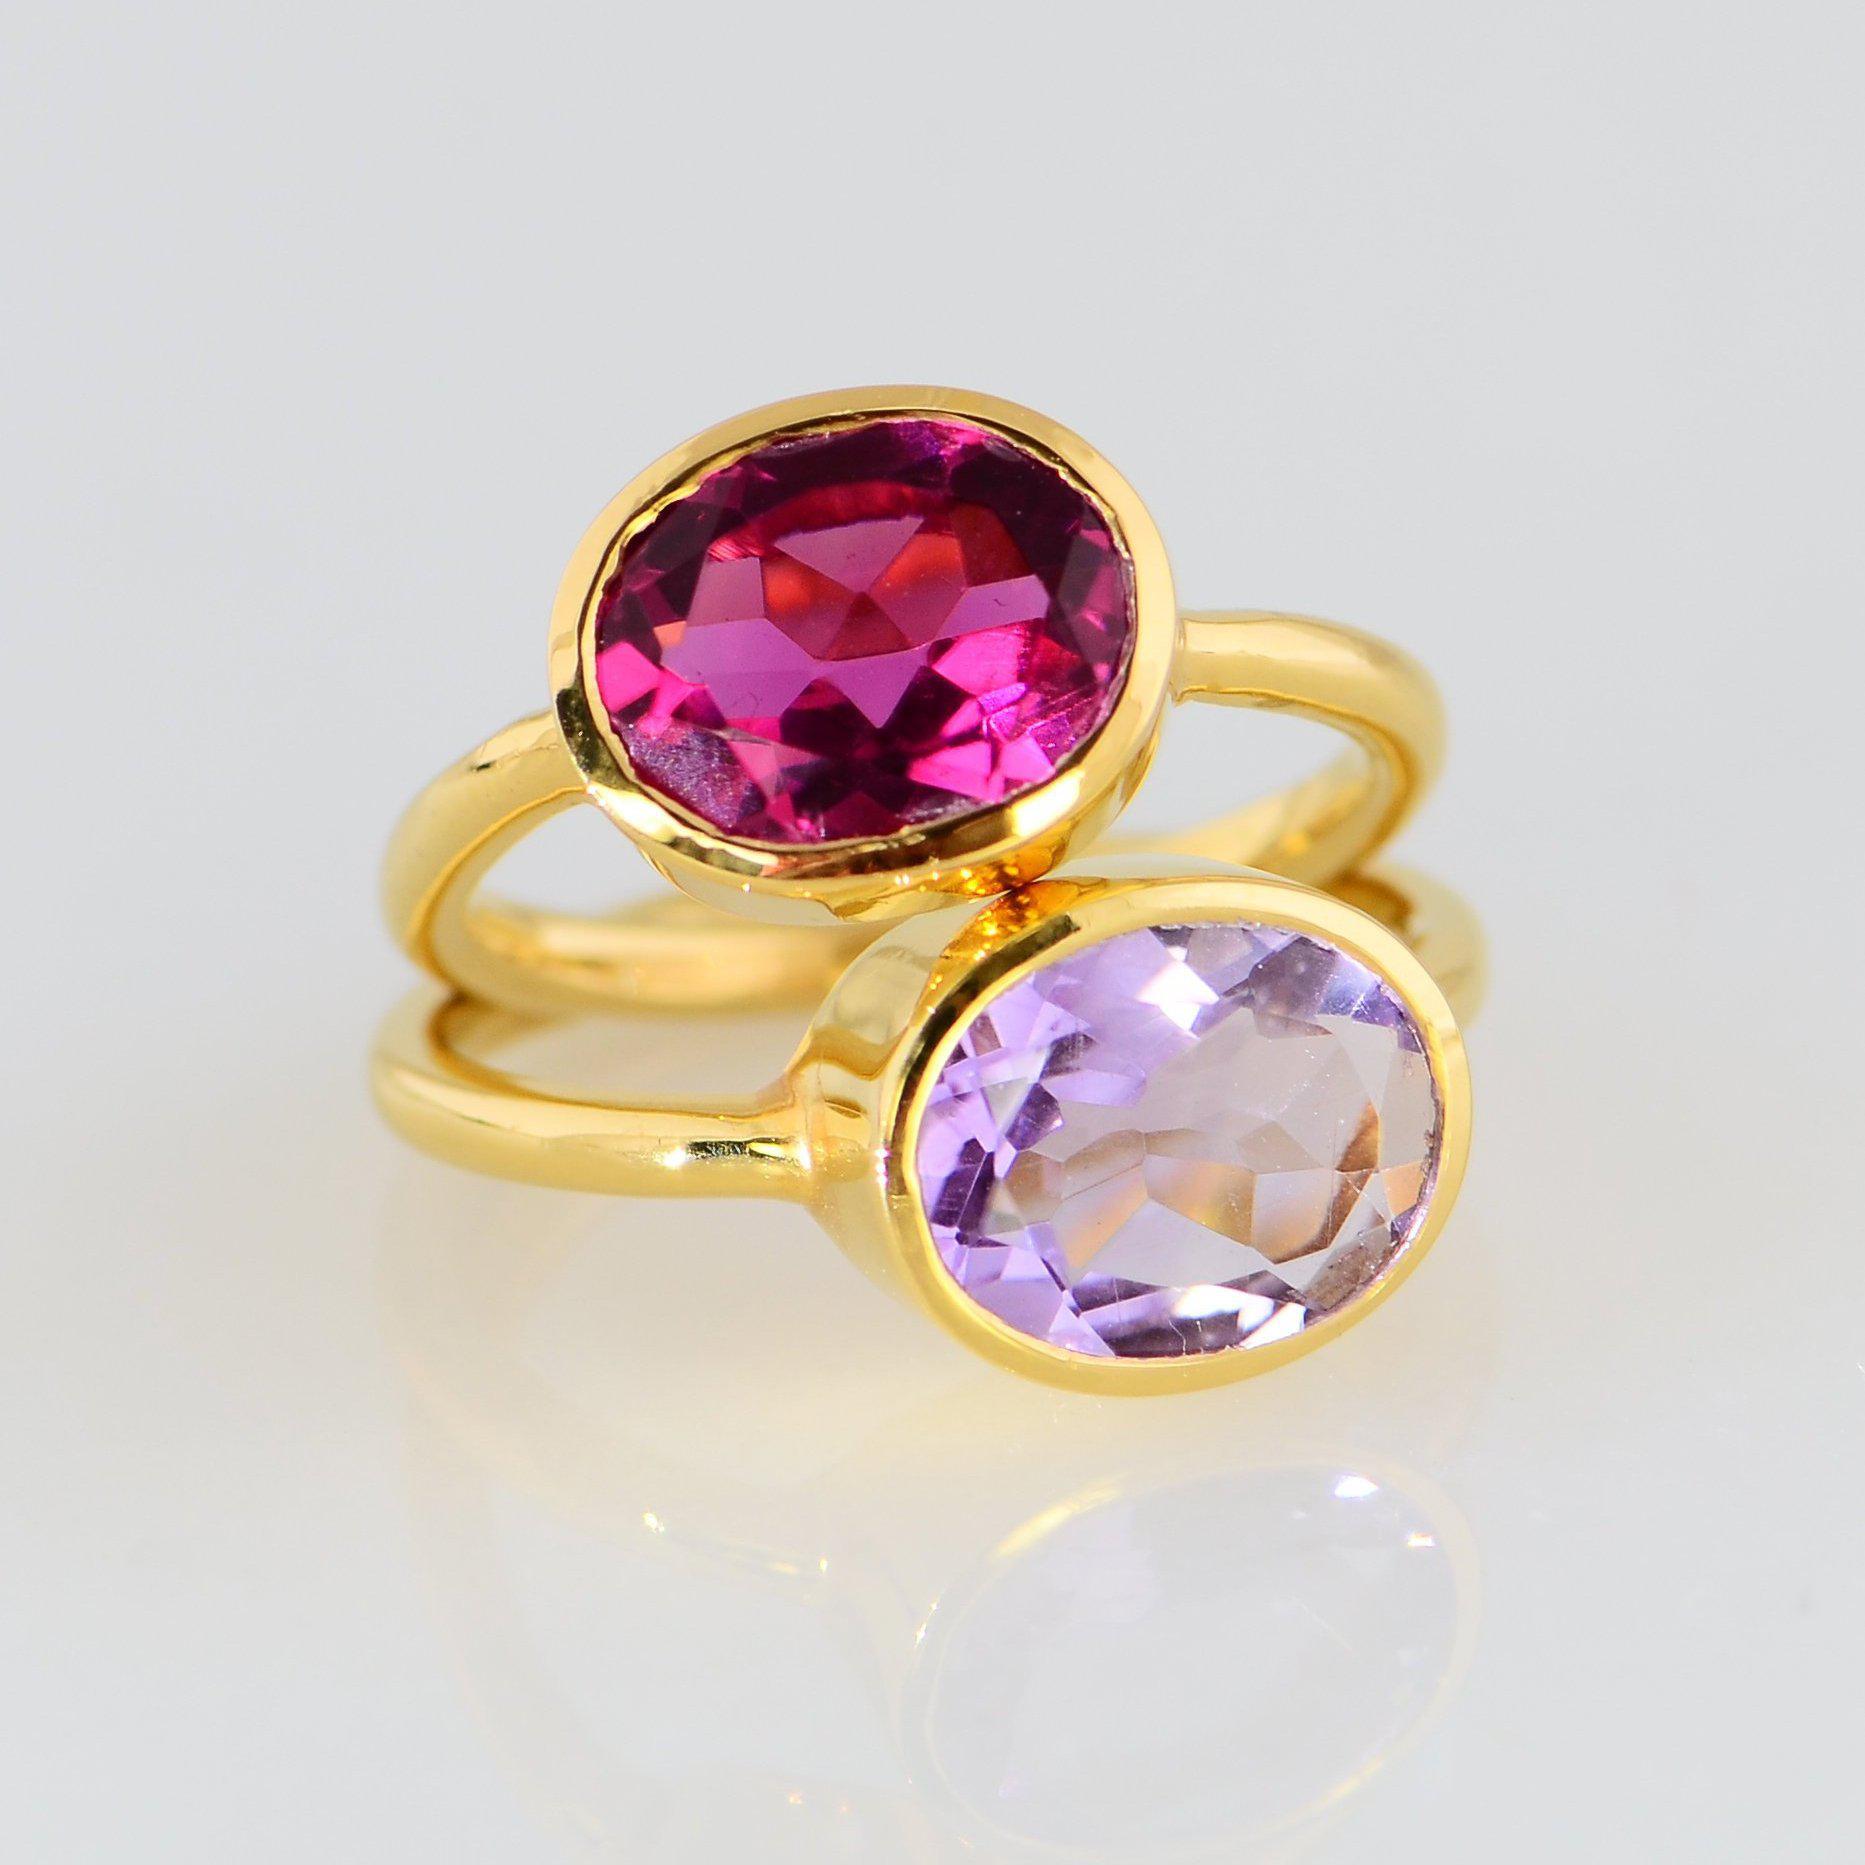 Duo Gemstone Ring, Purple Amethyst, Pink Spinel Quartz Ring, Fuchsia ring, Gemstone rings, Stackable Ring, Oval Stone Ring, Stacking Ring